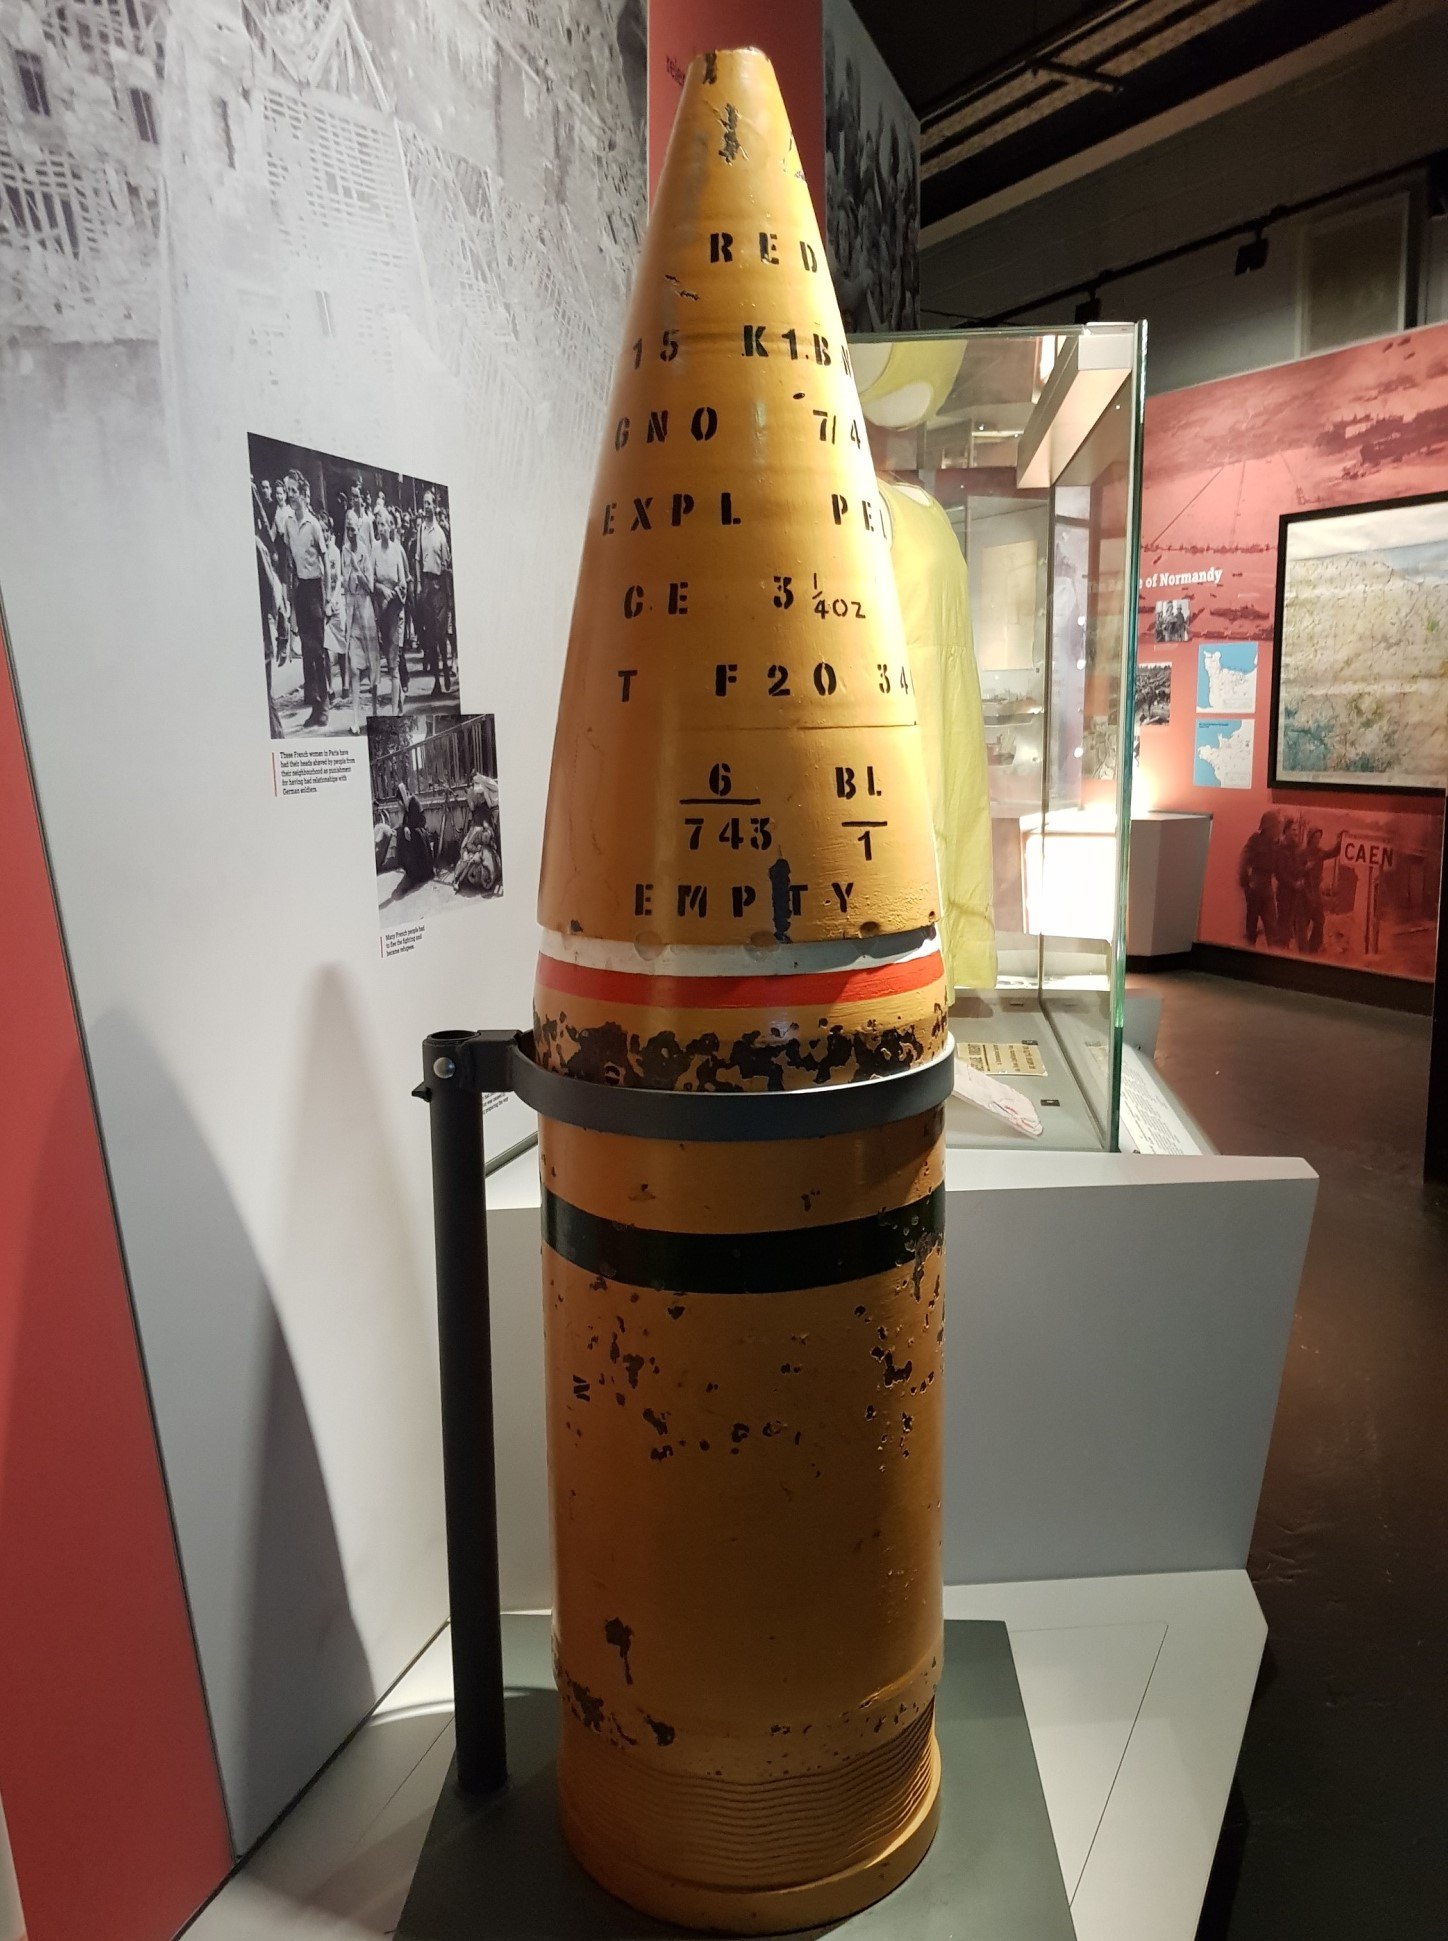 A 15 inch shell from the Second World War